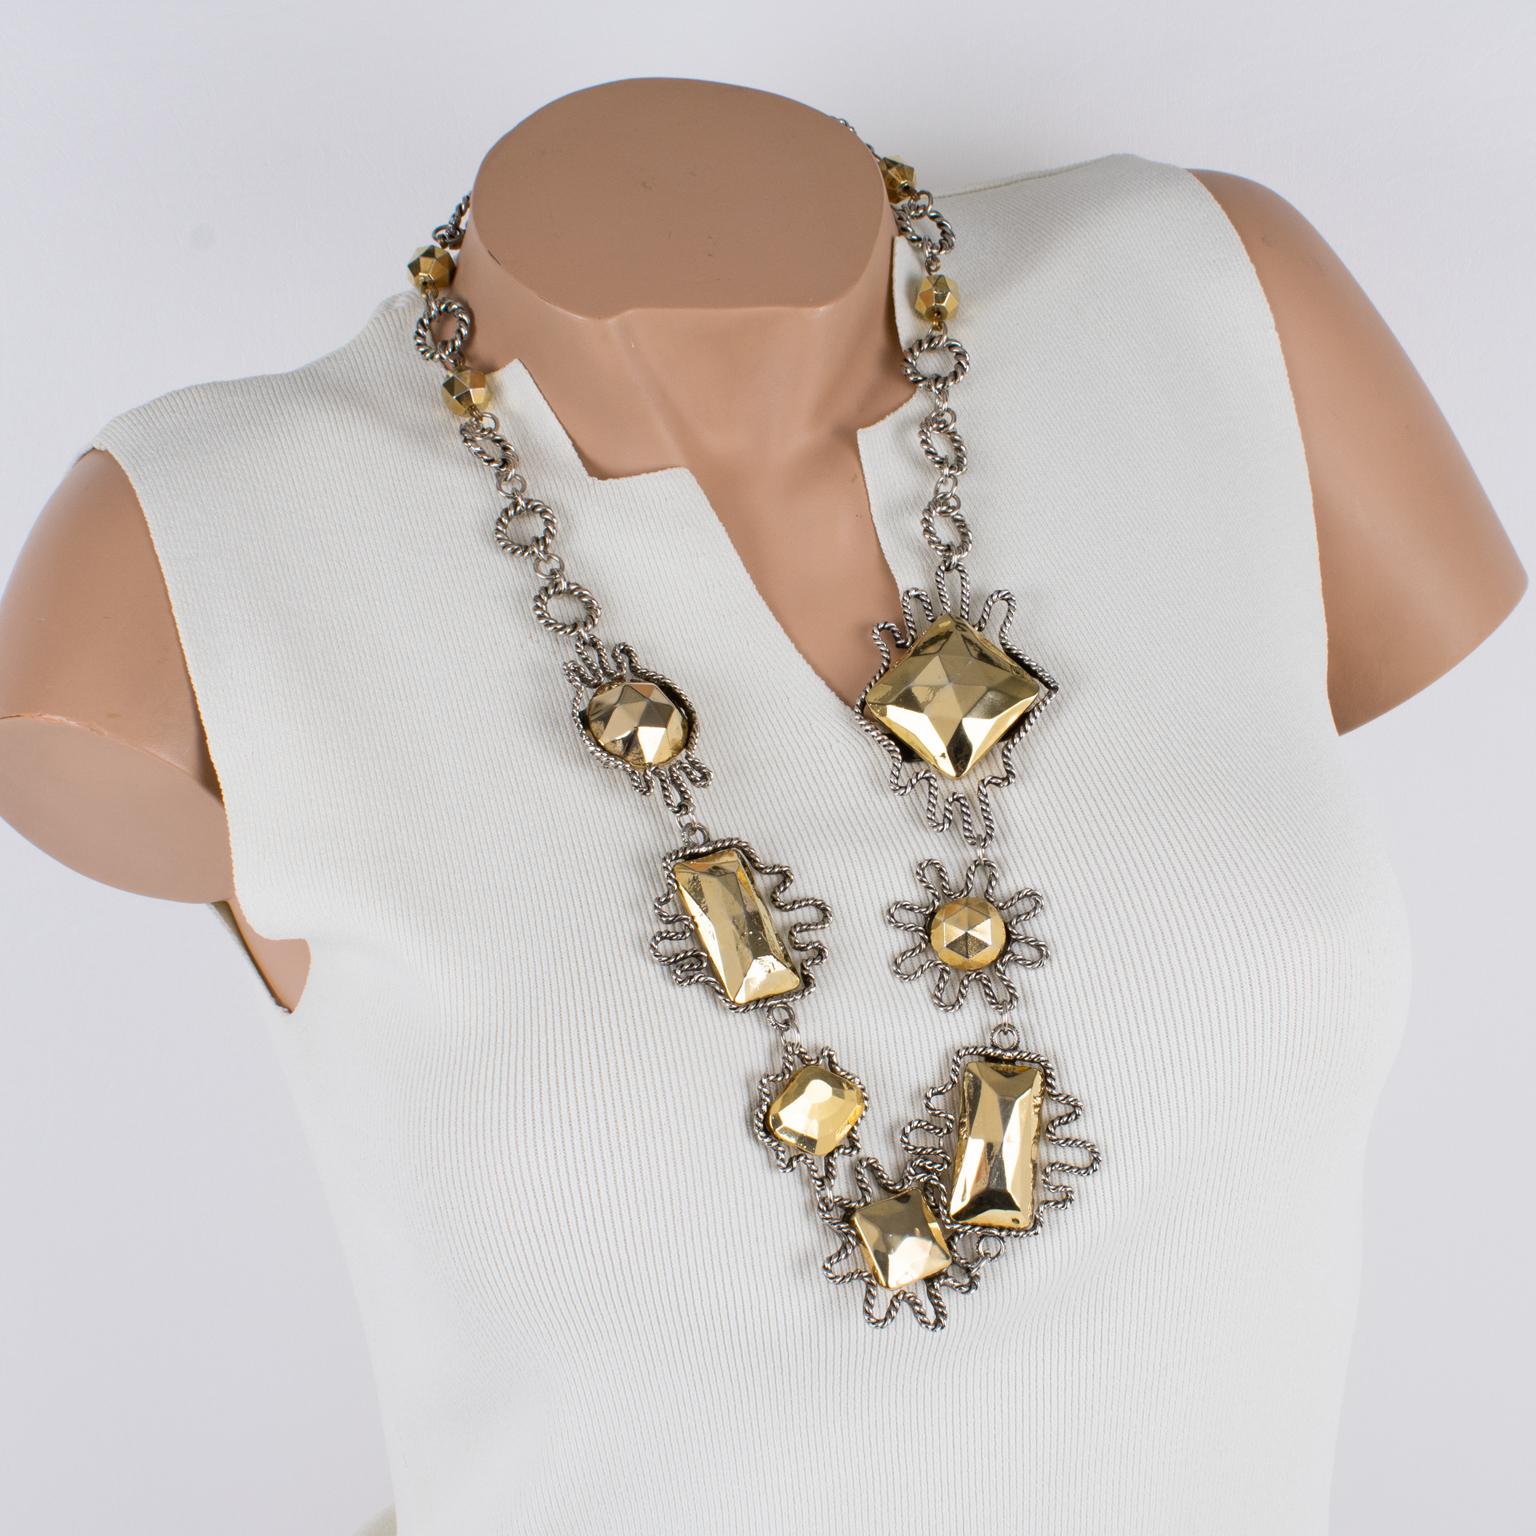 French jewelry maker Alexis Lahellec designed this stunning charm necklace in the 1980s. This piece features a silver plate rope chain ornate with charm medallions. Each medallion has a different shape with silver plate framing topped with gilt